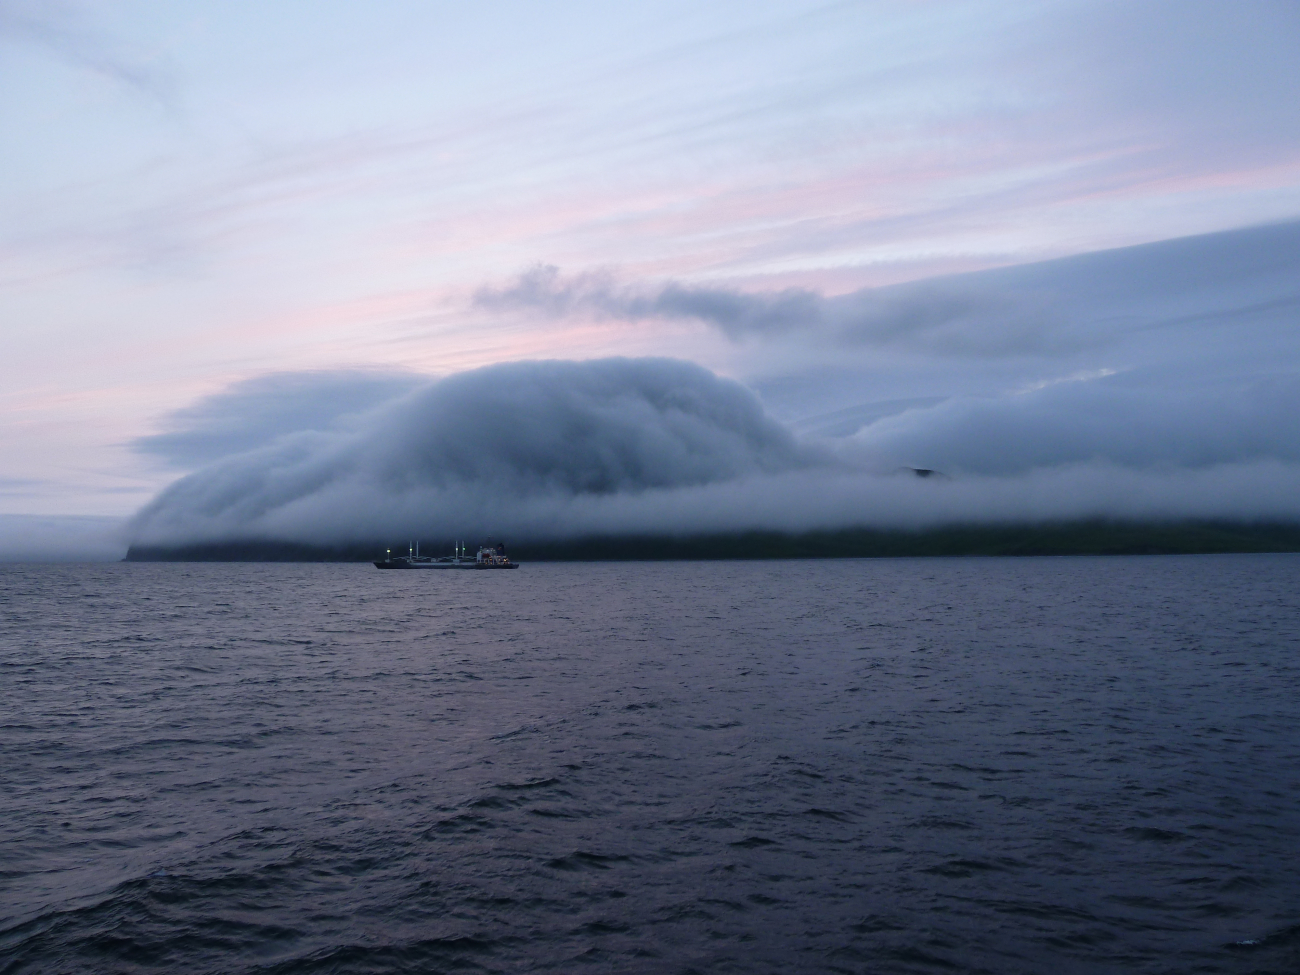 A gentle fog following topography at Dutch Harbor as a freighter leaves for anunknown port